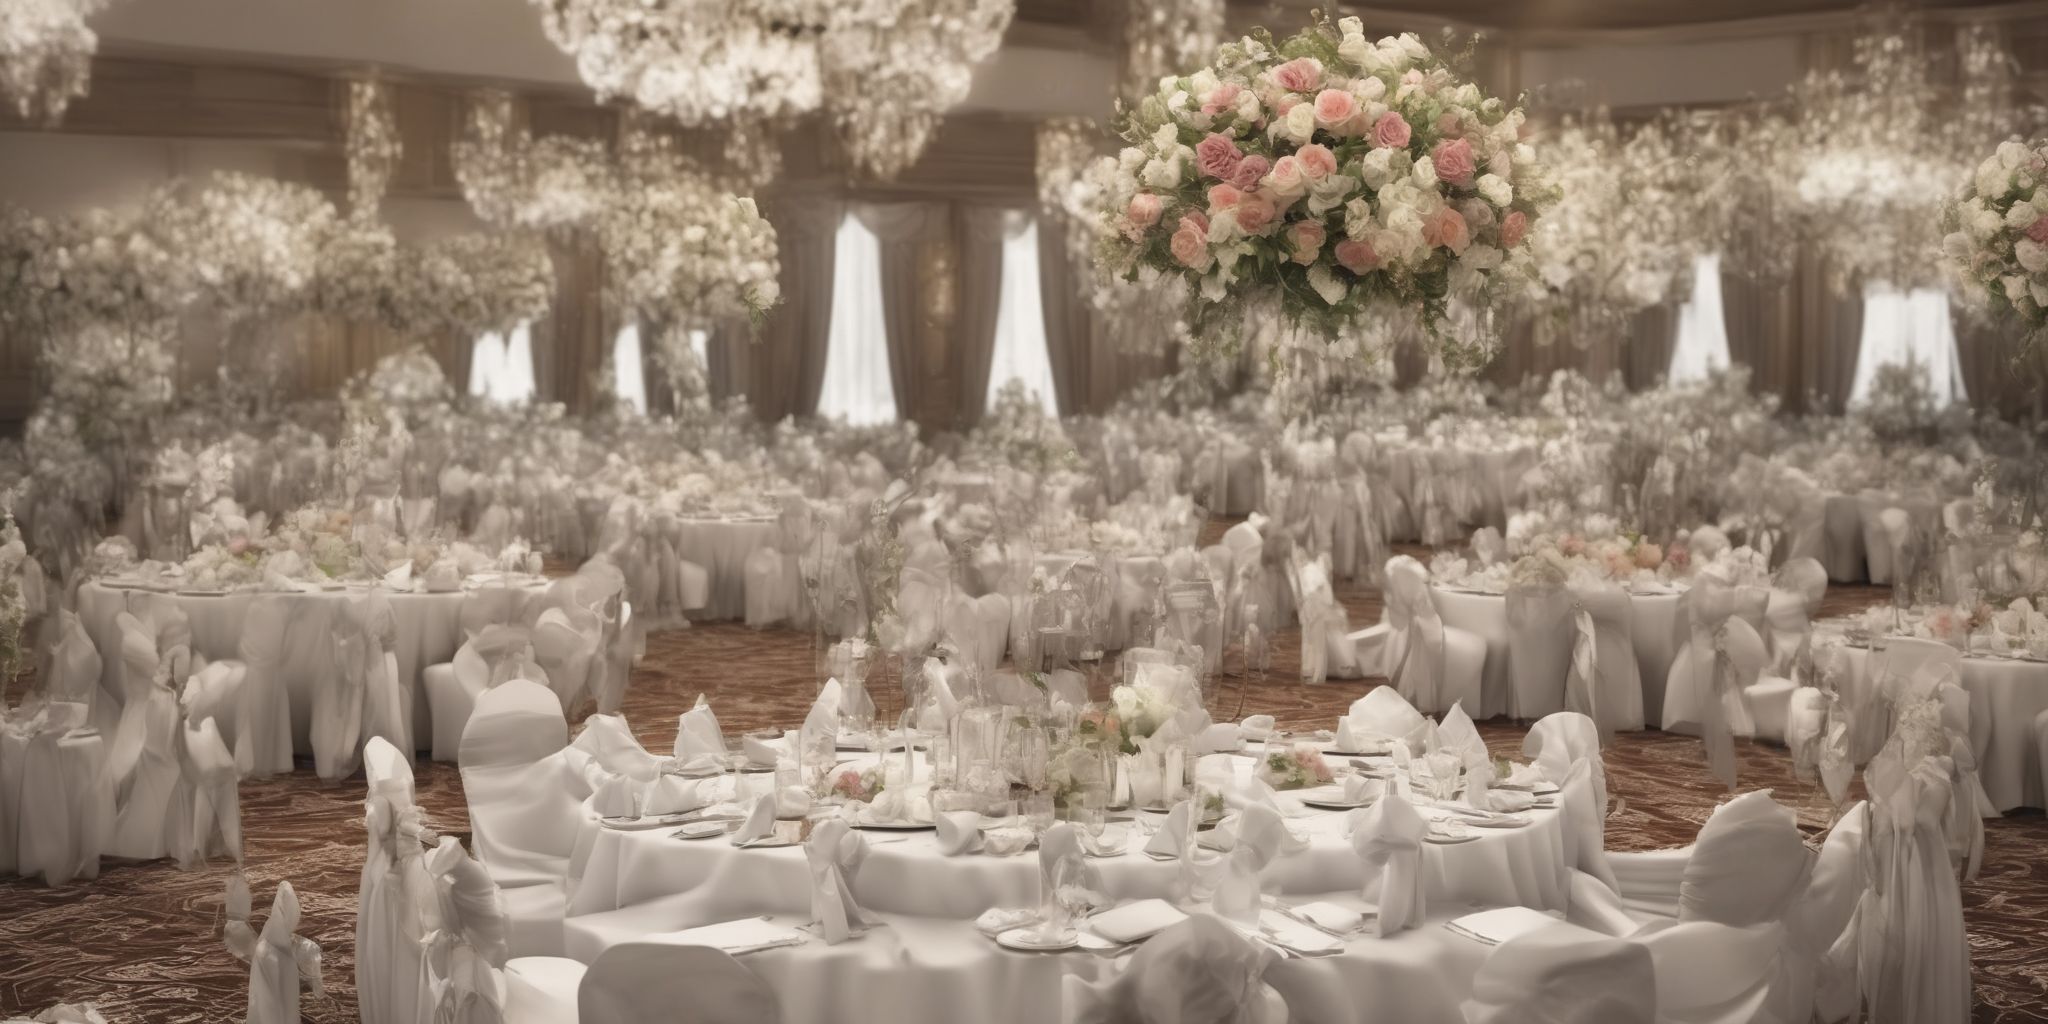 Reception  in realistic, photographic style